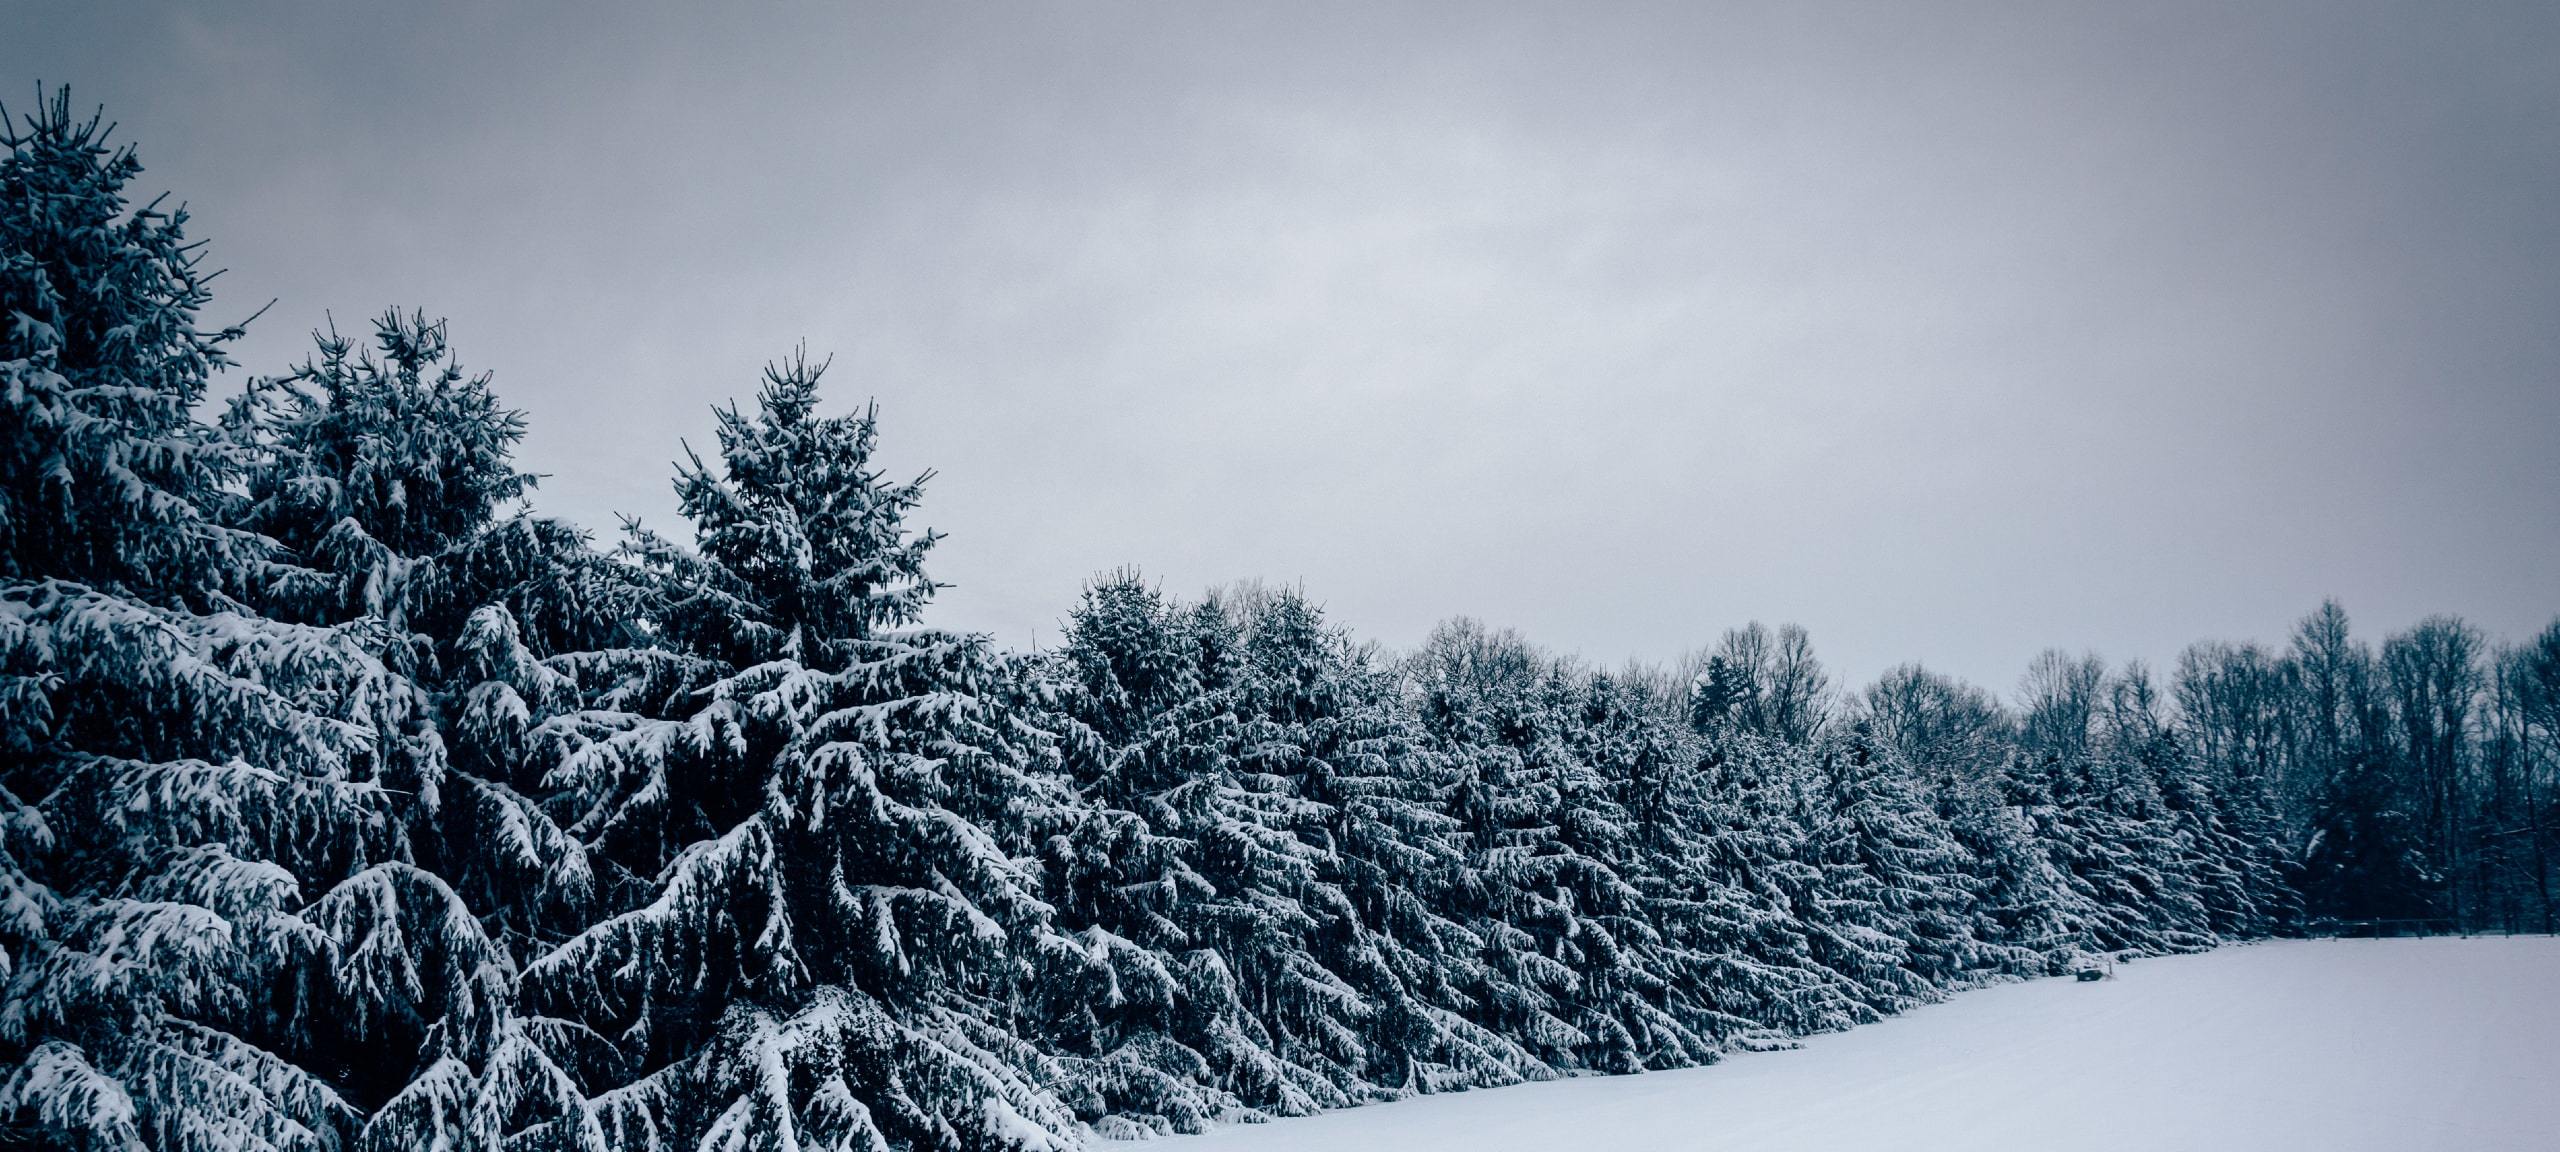 Pine trees in the snow in Carroll County, Maryland